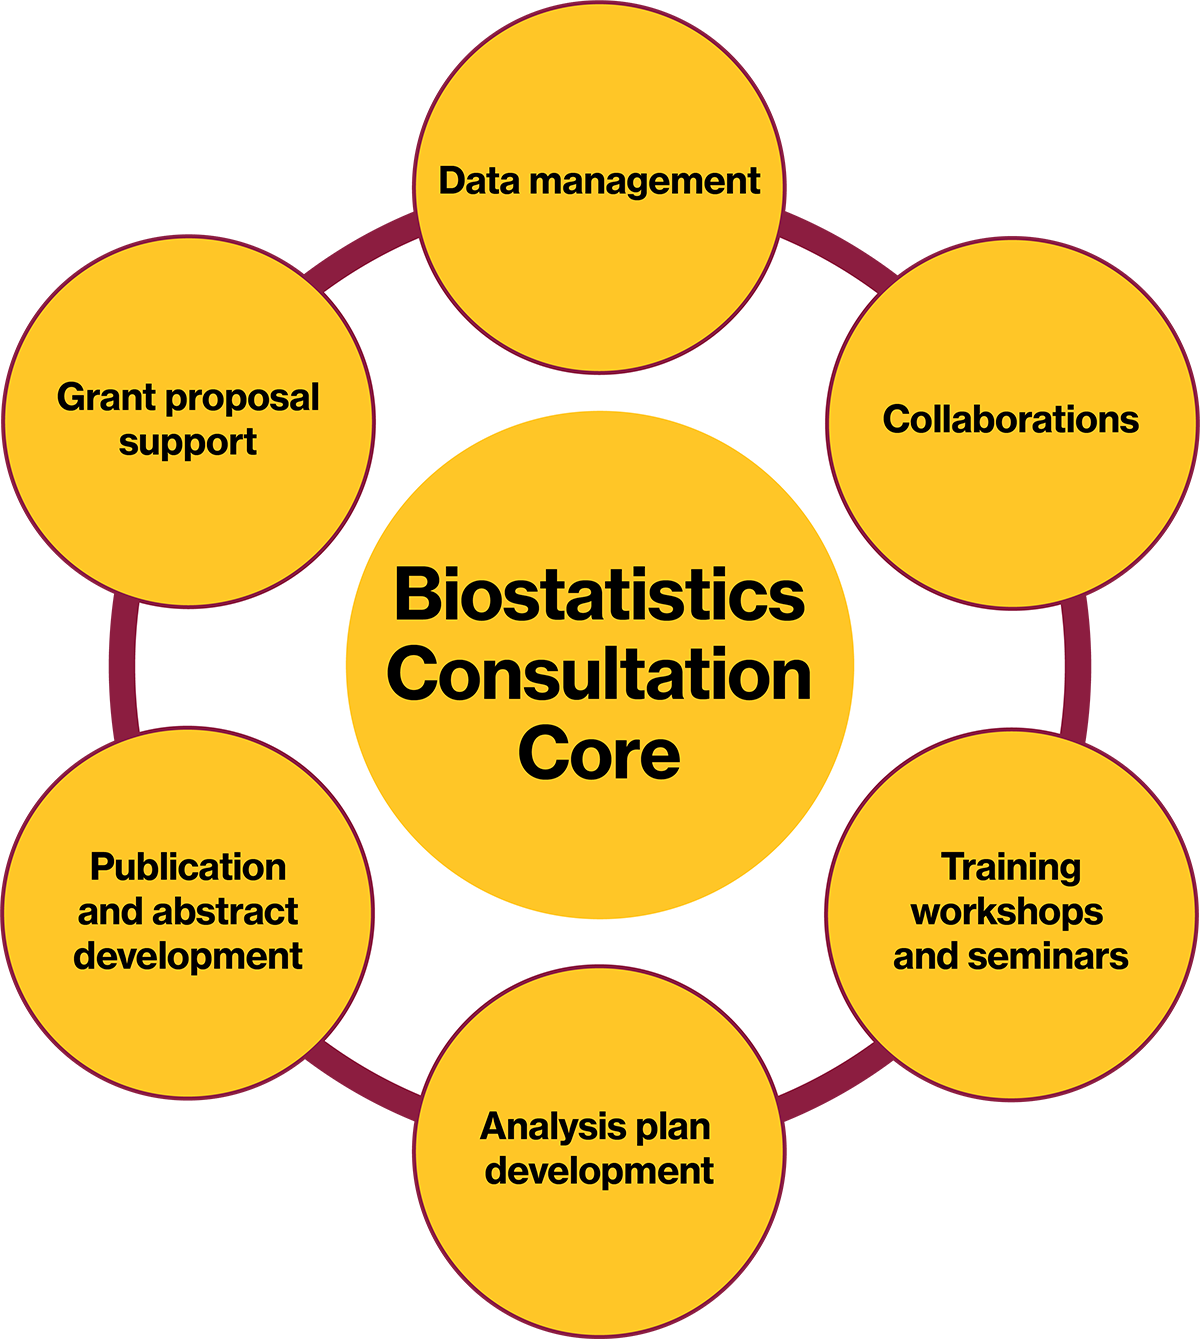 Graphic with "Biostatistics Consultation Core" at the center. Around this are data management, collaborations, training workshops and seminars, analysis plan development, publication and abstract development, and grant proposal support.